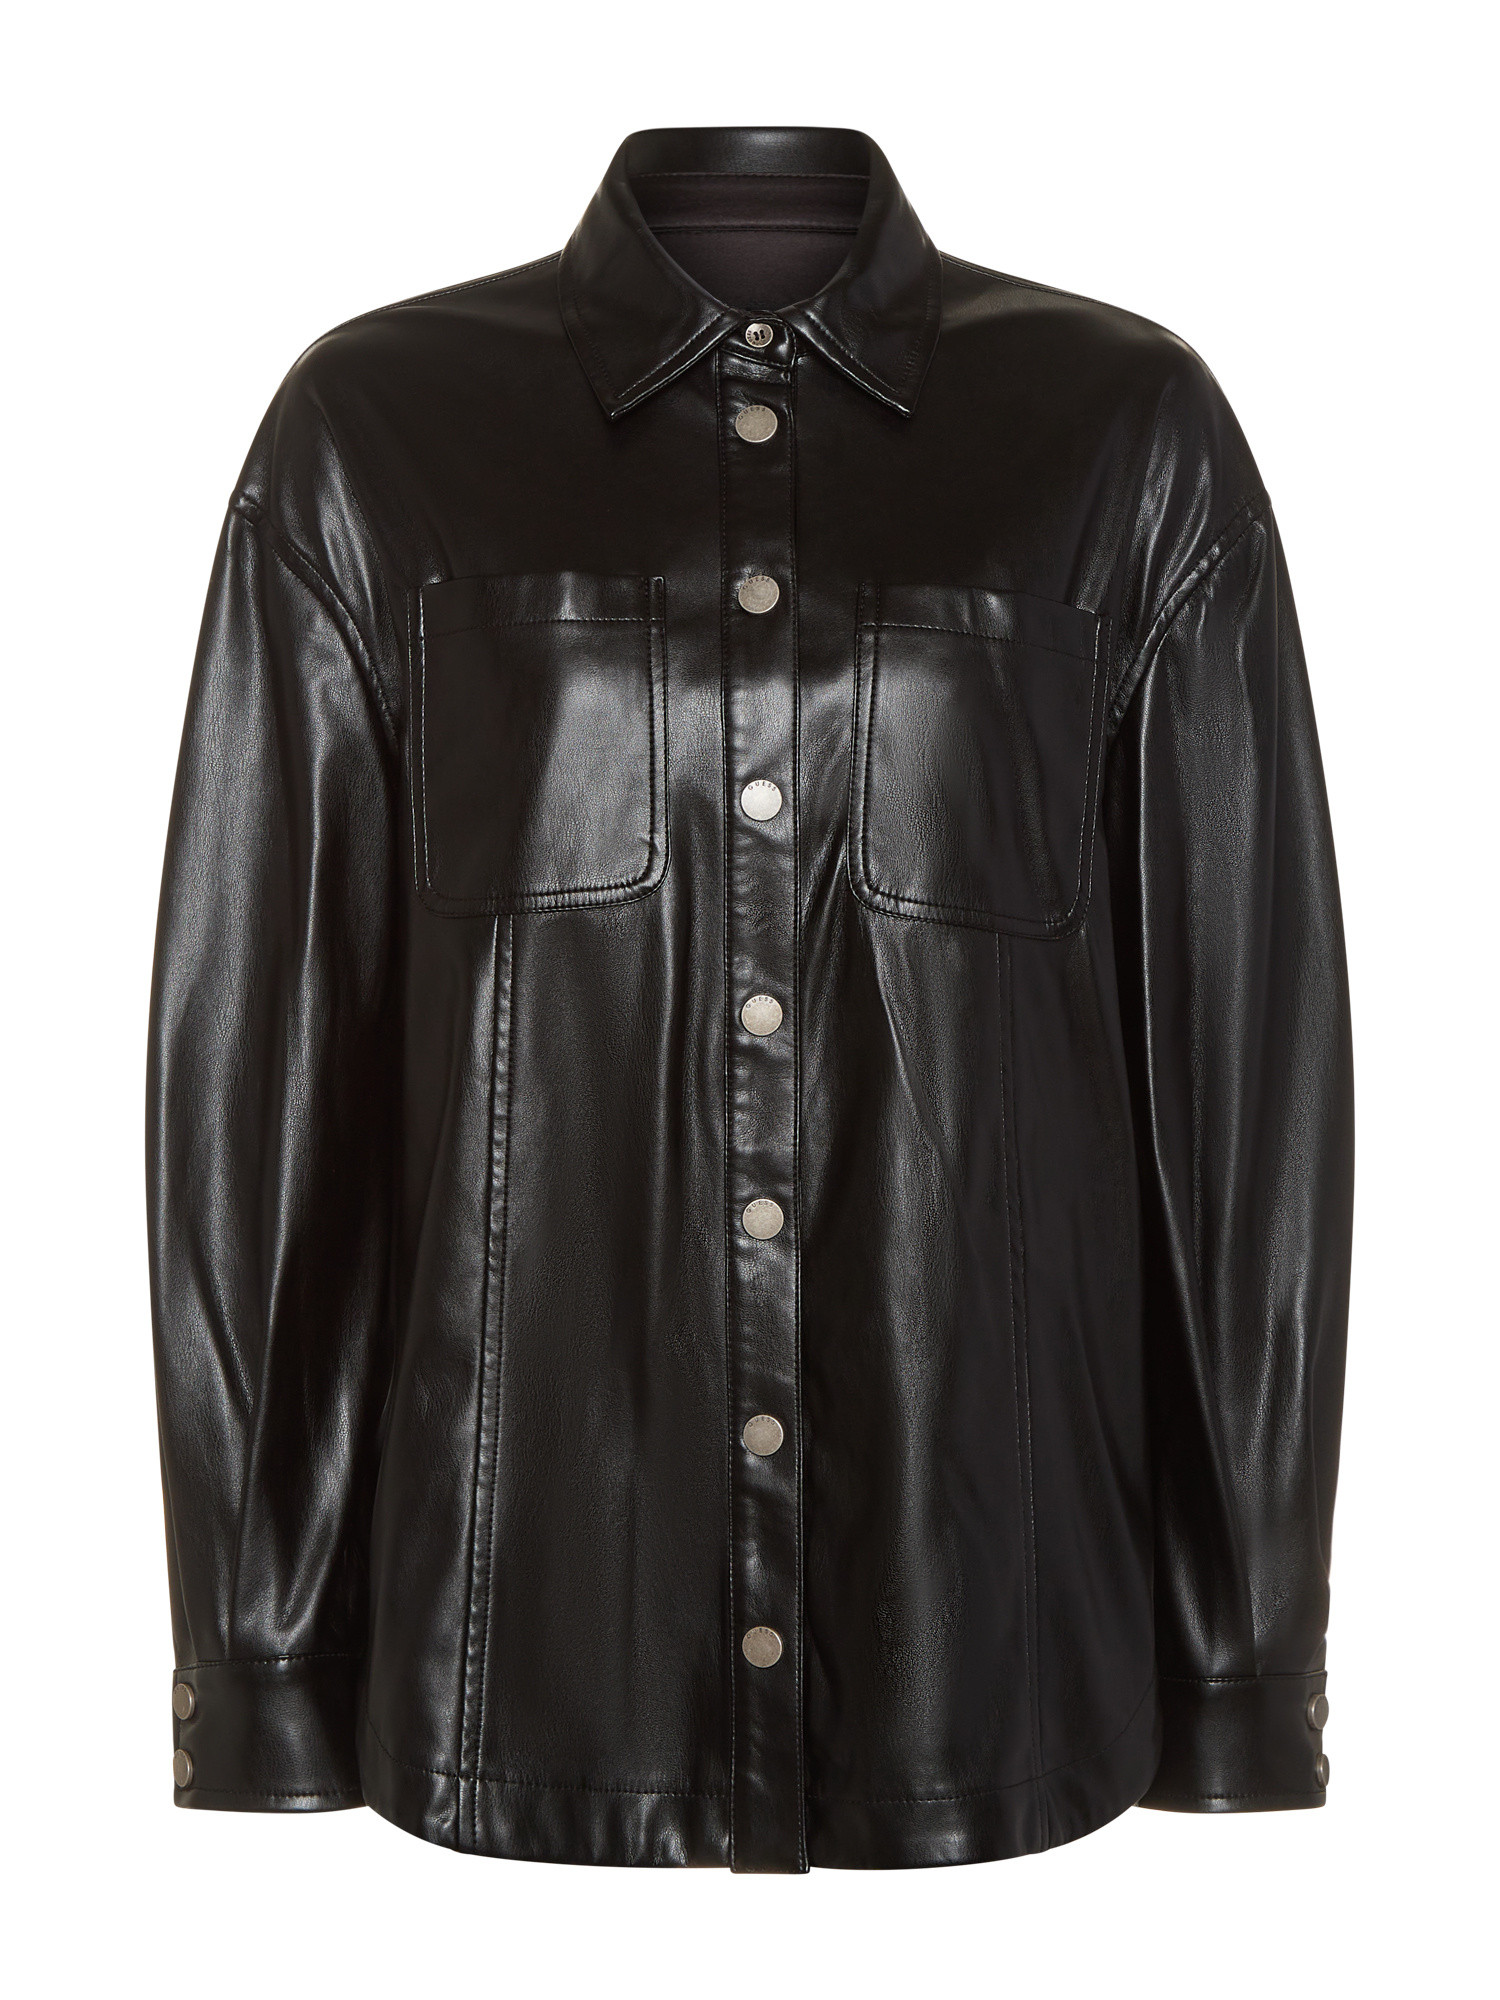 Guess - Faux leather shirt, Black, large image number 0